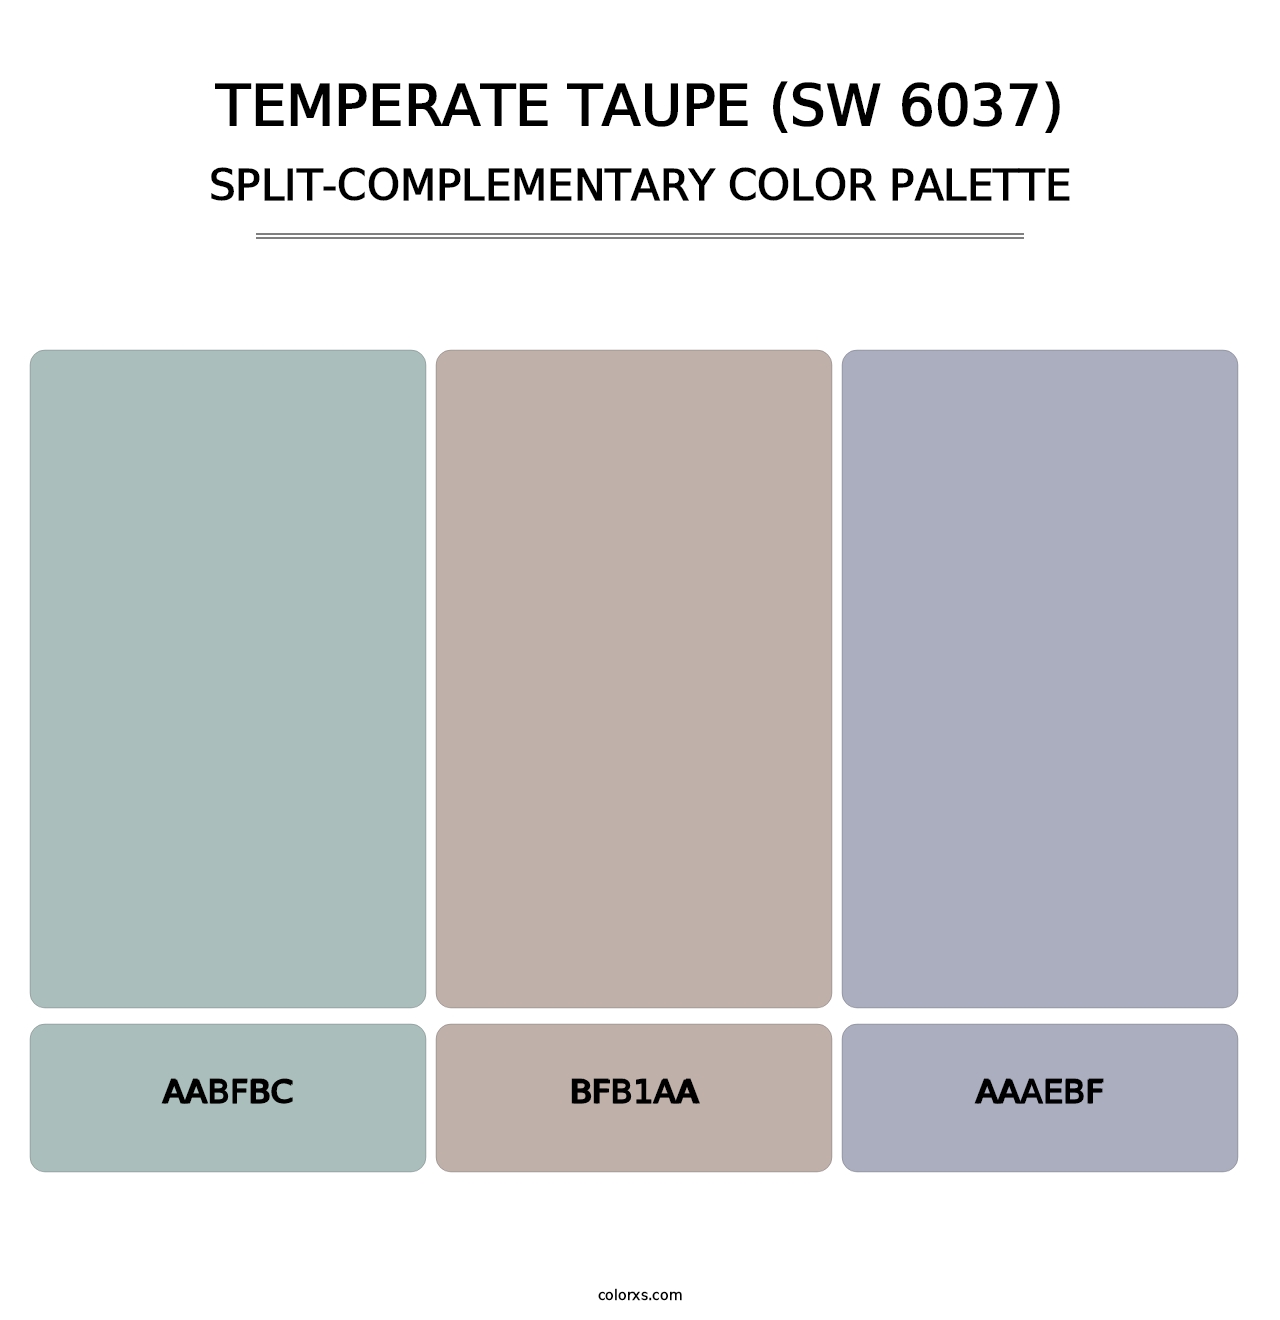 Temperate Taupe (SW 6037) - Split-Complementary Color Palette